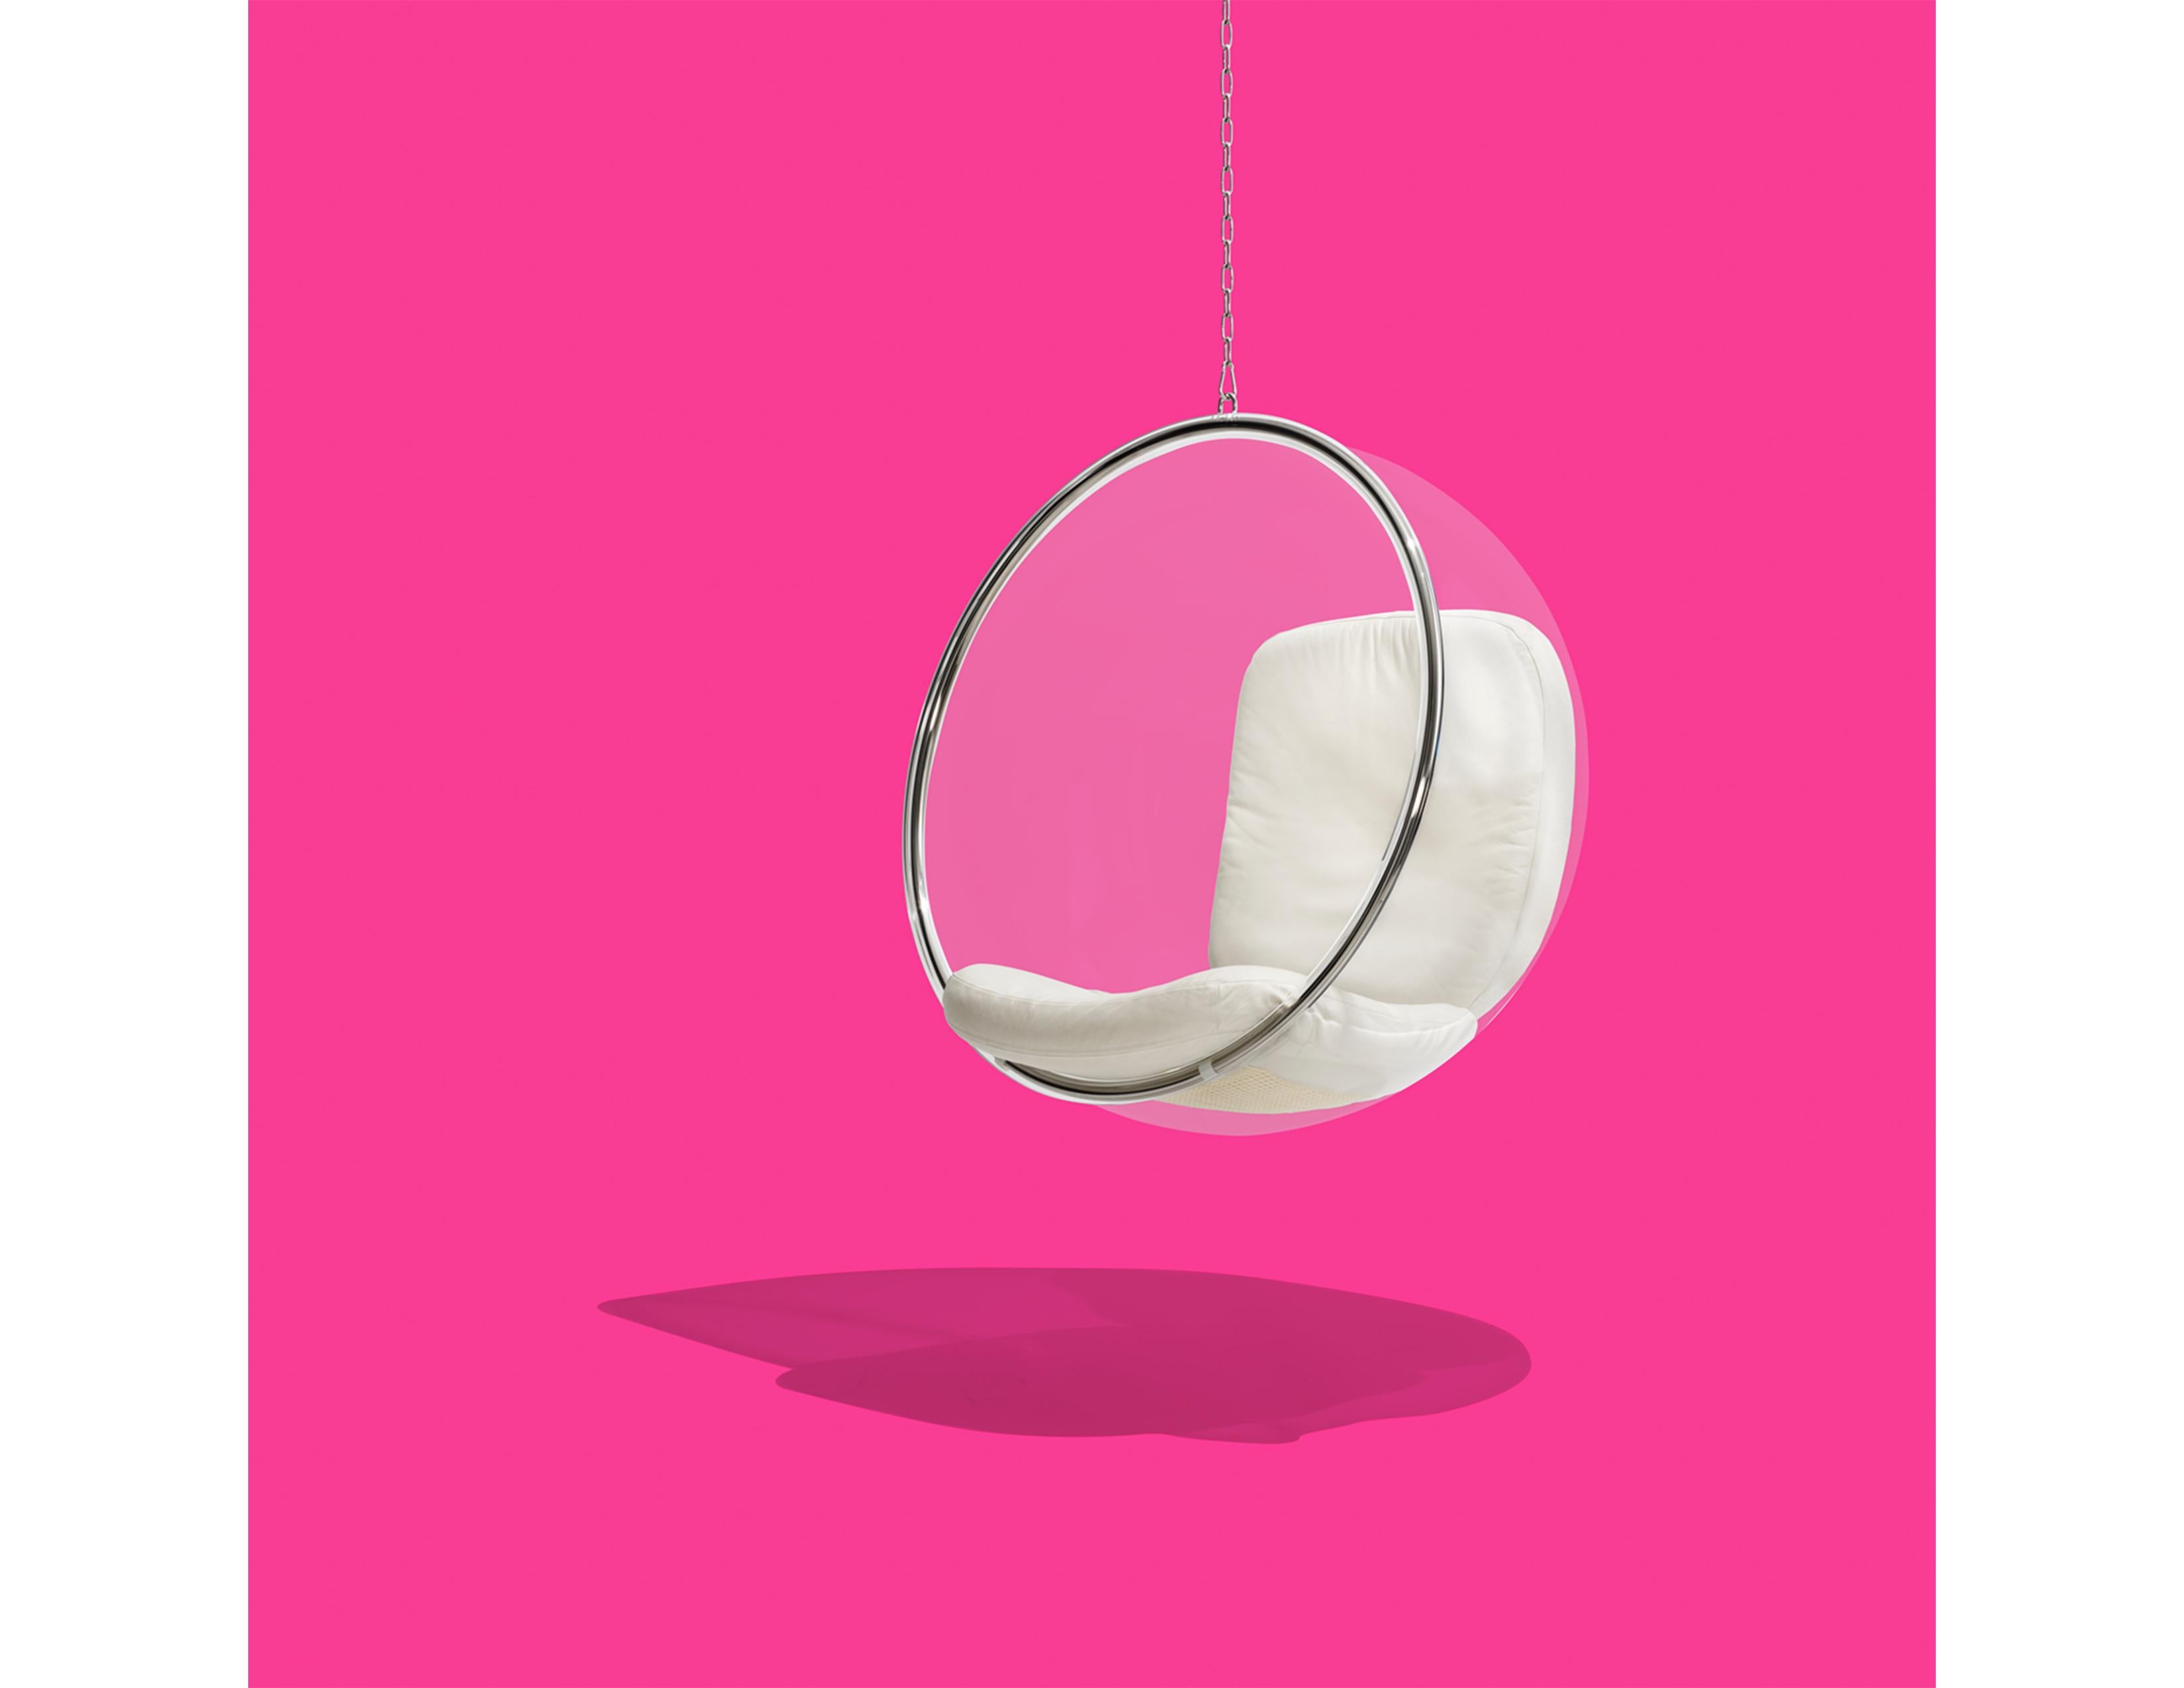 The bubble chair was designed by Eero Aarnio in 1968. According to Eero’s notes, the Bubble hangs from the ceiling because ‘there is no nice way to make a clear pedestal.’ It shares the same unique acoustics as the ball chair, a little cocoon that